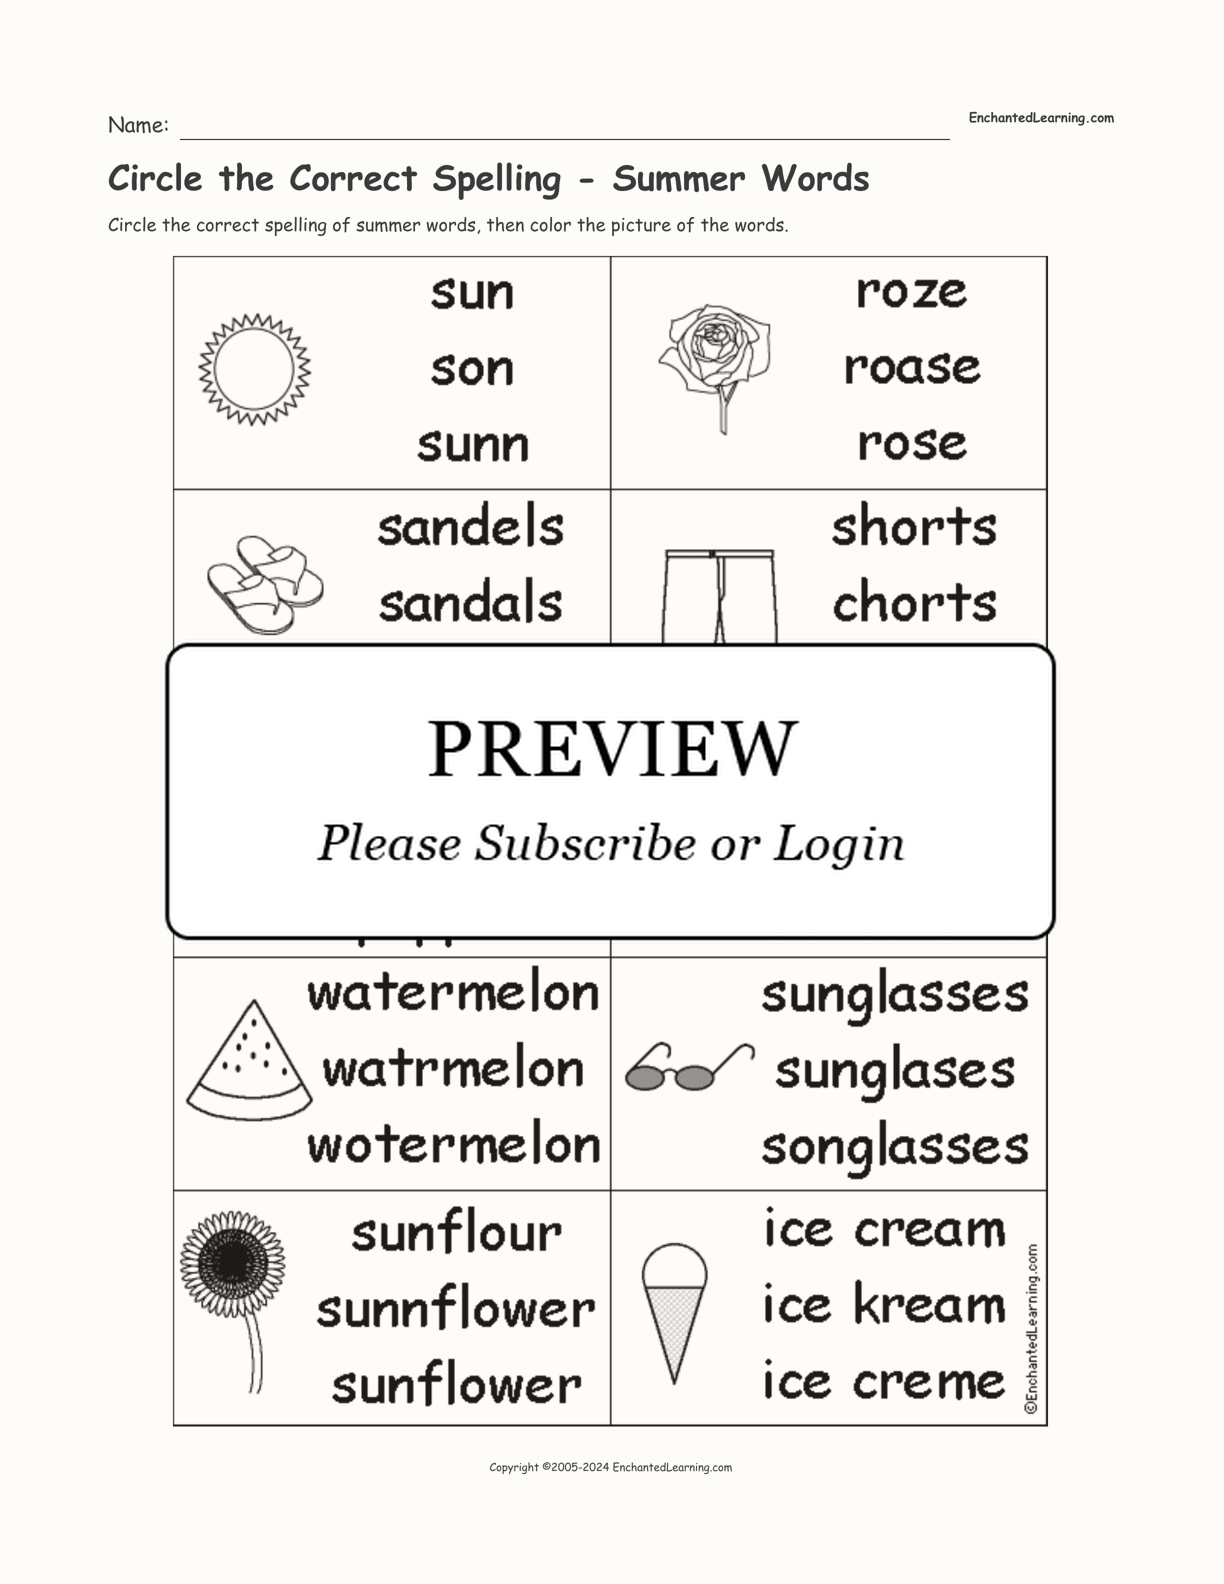 Circle the Correct Spelling - Summer Words interactive worksheet page 1